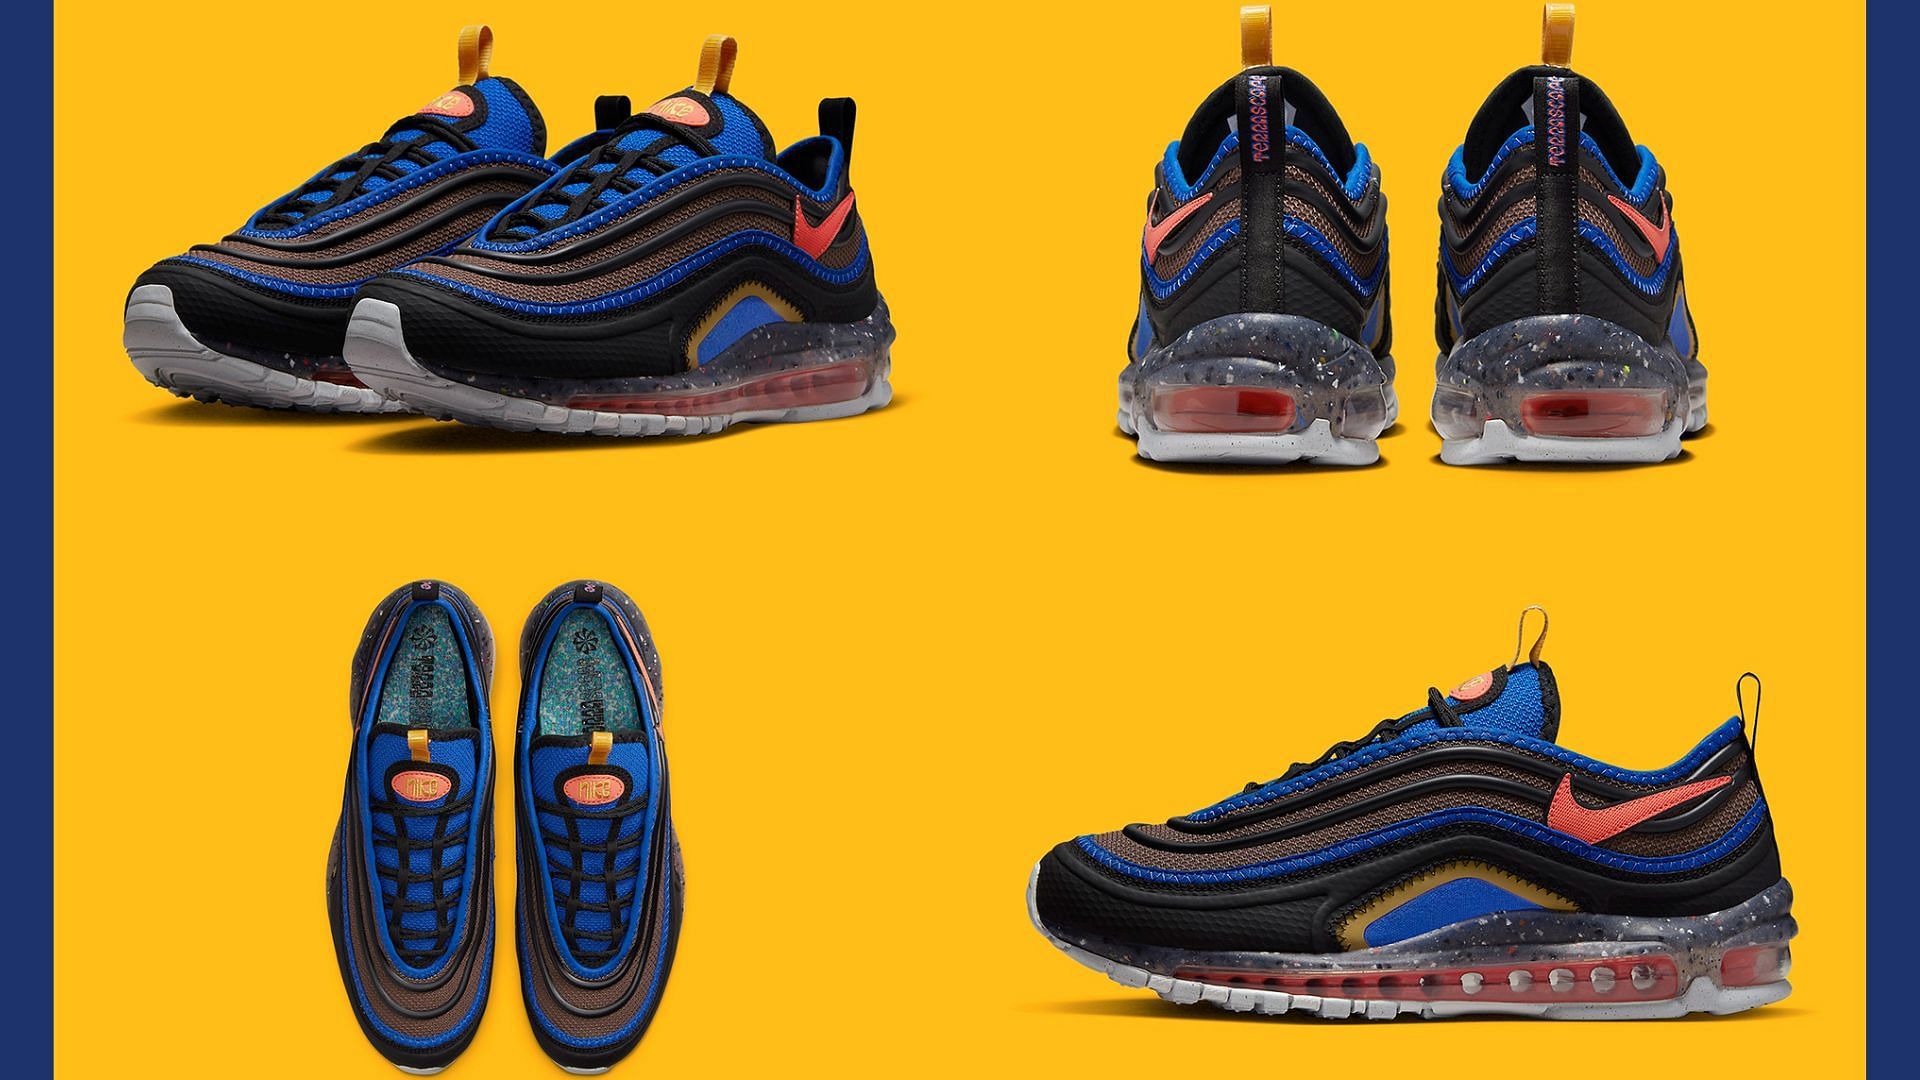 Take a detailed look at the upcoming Nike Air Max 97 Terrascape Magic Ember shoes (Image via Sportskeeda)